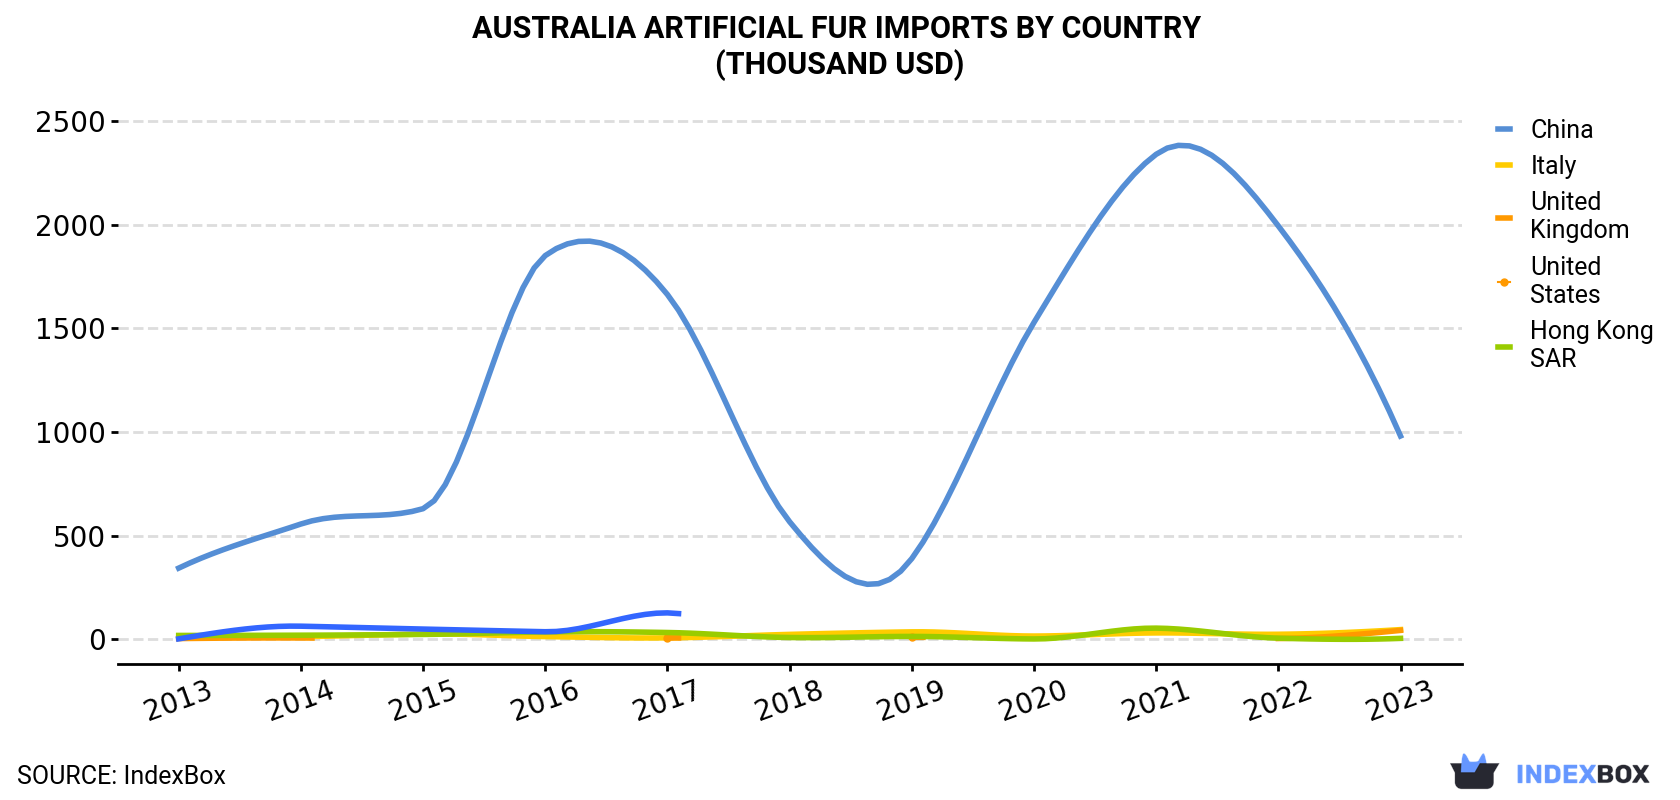 Australia Artificial Fur Imports By Country (Thousand USD)